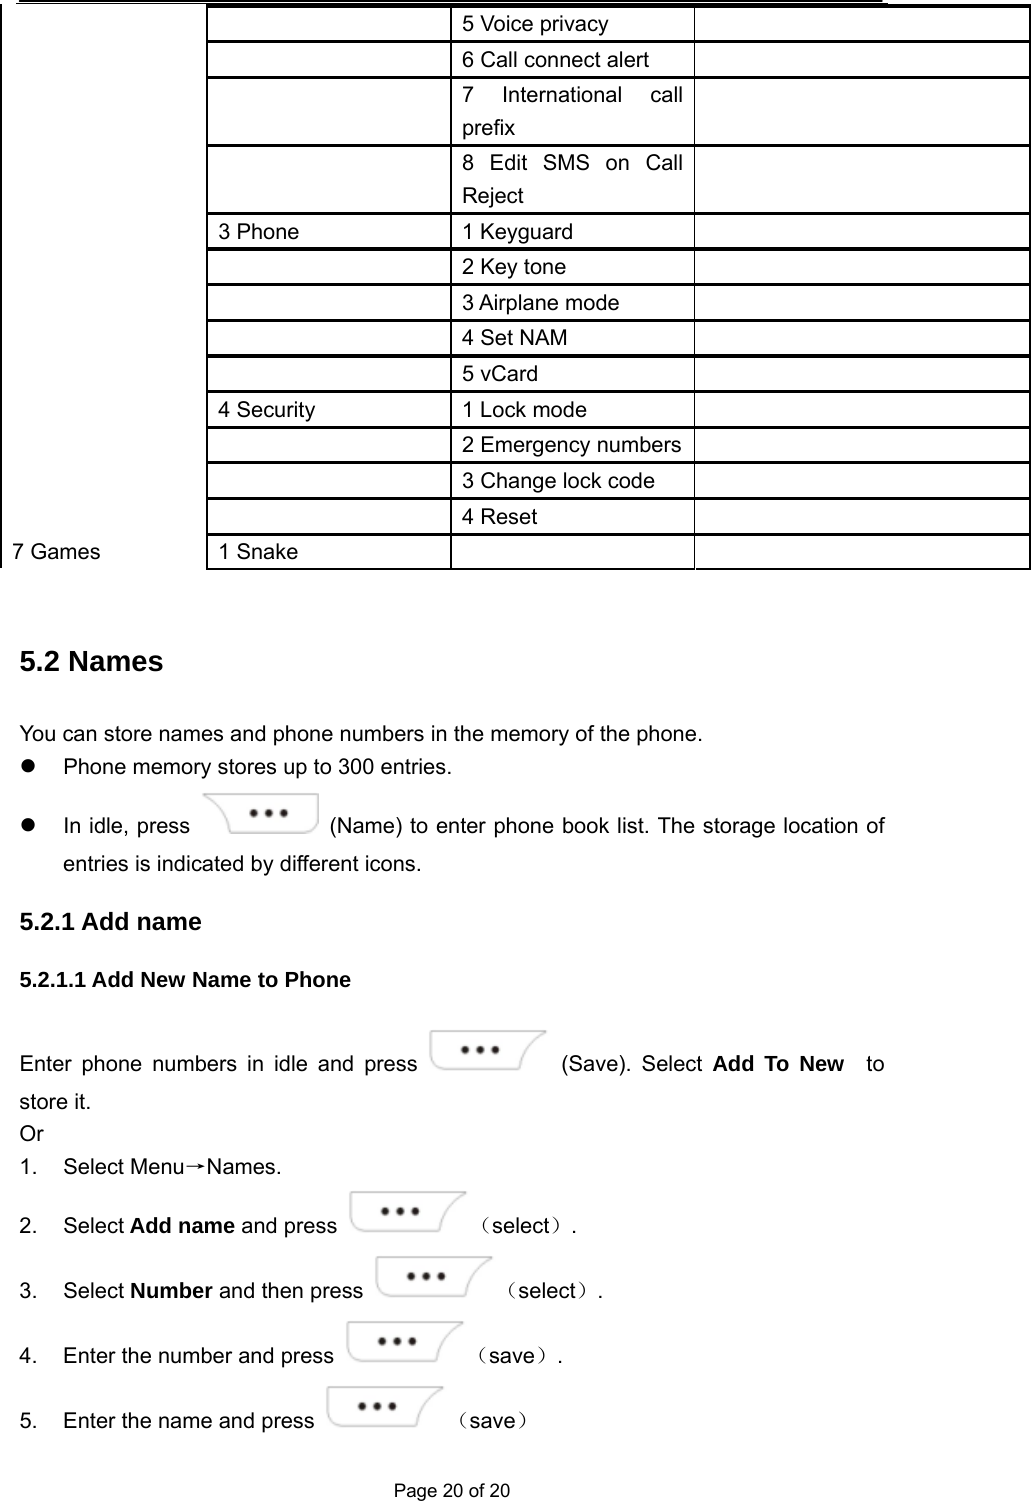  Page 20 of 20   5 Voice privacy     6 Call connect alert     7 International call prefix    8 Edit SMS on Call Reject  3 Phone  1 Keyguard     2 Key tone    3 Airplane mode    4 Set NAM    5 vCard  4 Security  1 Lock mode     2 Emergency numbers    3 Change lock code     4 Reset  7 Games  1 Snake      5.2 Names You can store names and phone numbers in the memory of the phone.   Phone memory stores up to 300 entries.   In idle, press    (Name) to enter phone book list. The storage location of entries is indicated by different icons. 5.2.1 Add name 5.2.1.1 Add New Name to Phone   Enter phone numbers in idle and press   (Save). Select Add To New  to store it. Or 1. Select Menu→Names. 2. Select Add name and press  （select）. 3. Select Number and then press  （select）. 4.  Enter the number and press  （save）. 5.  Enter the name and press  （save） 